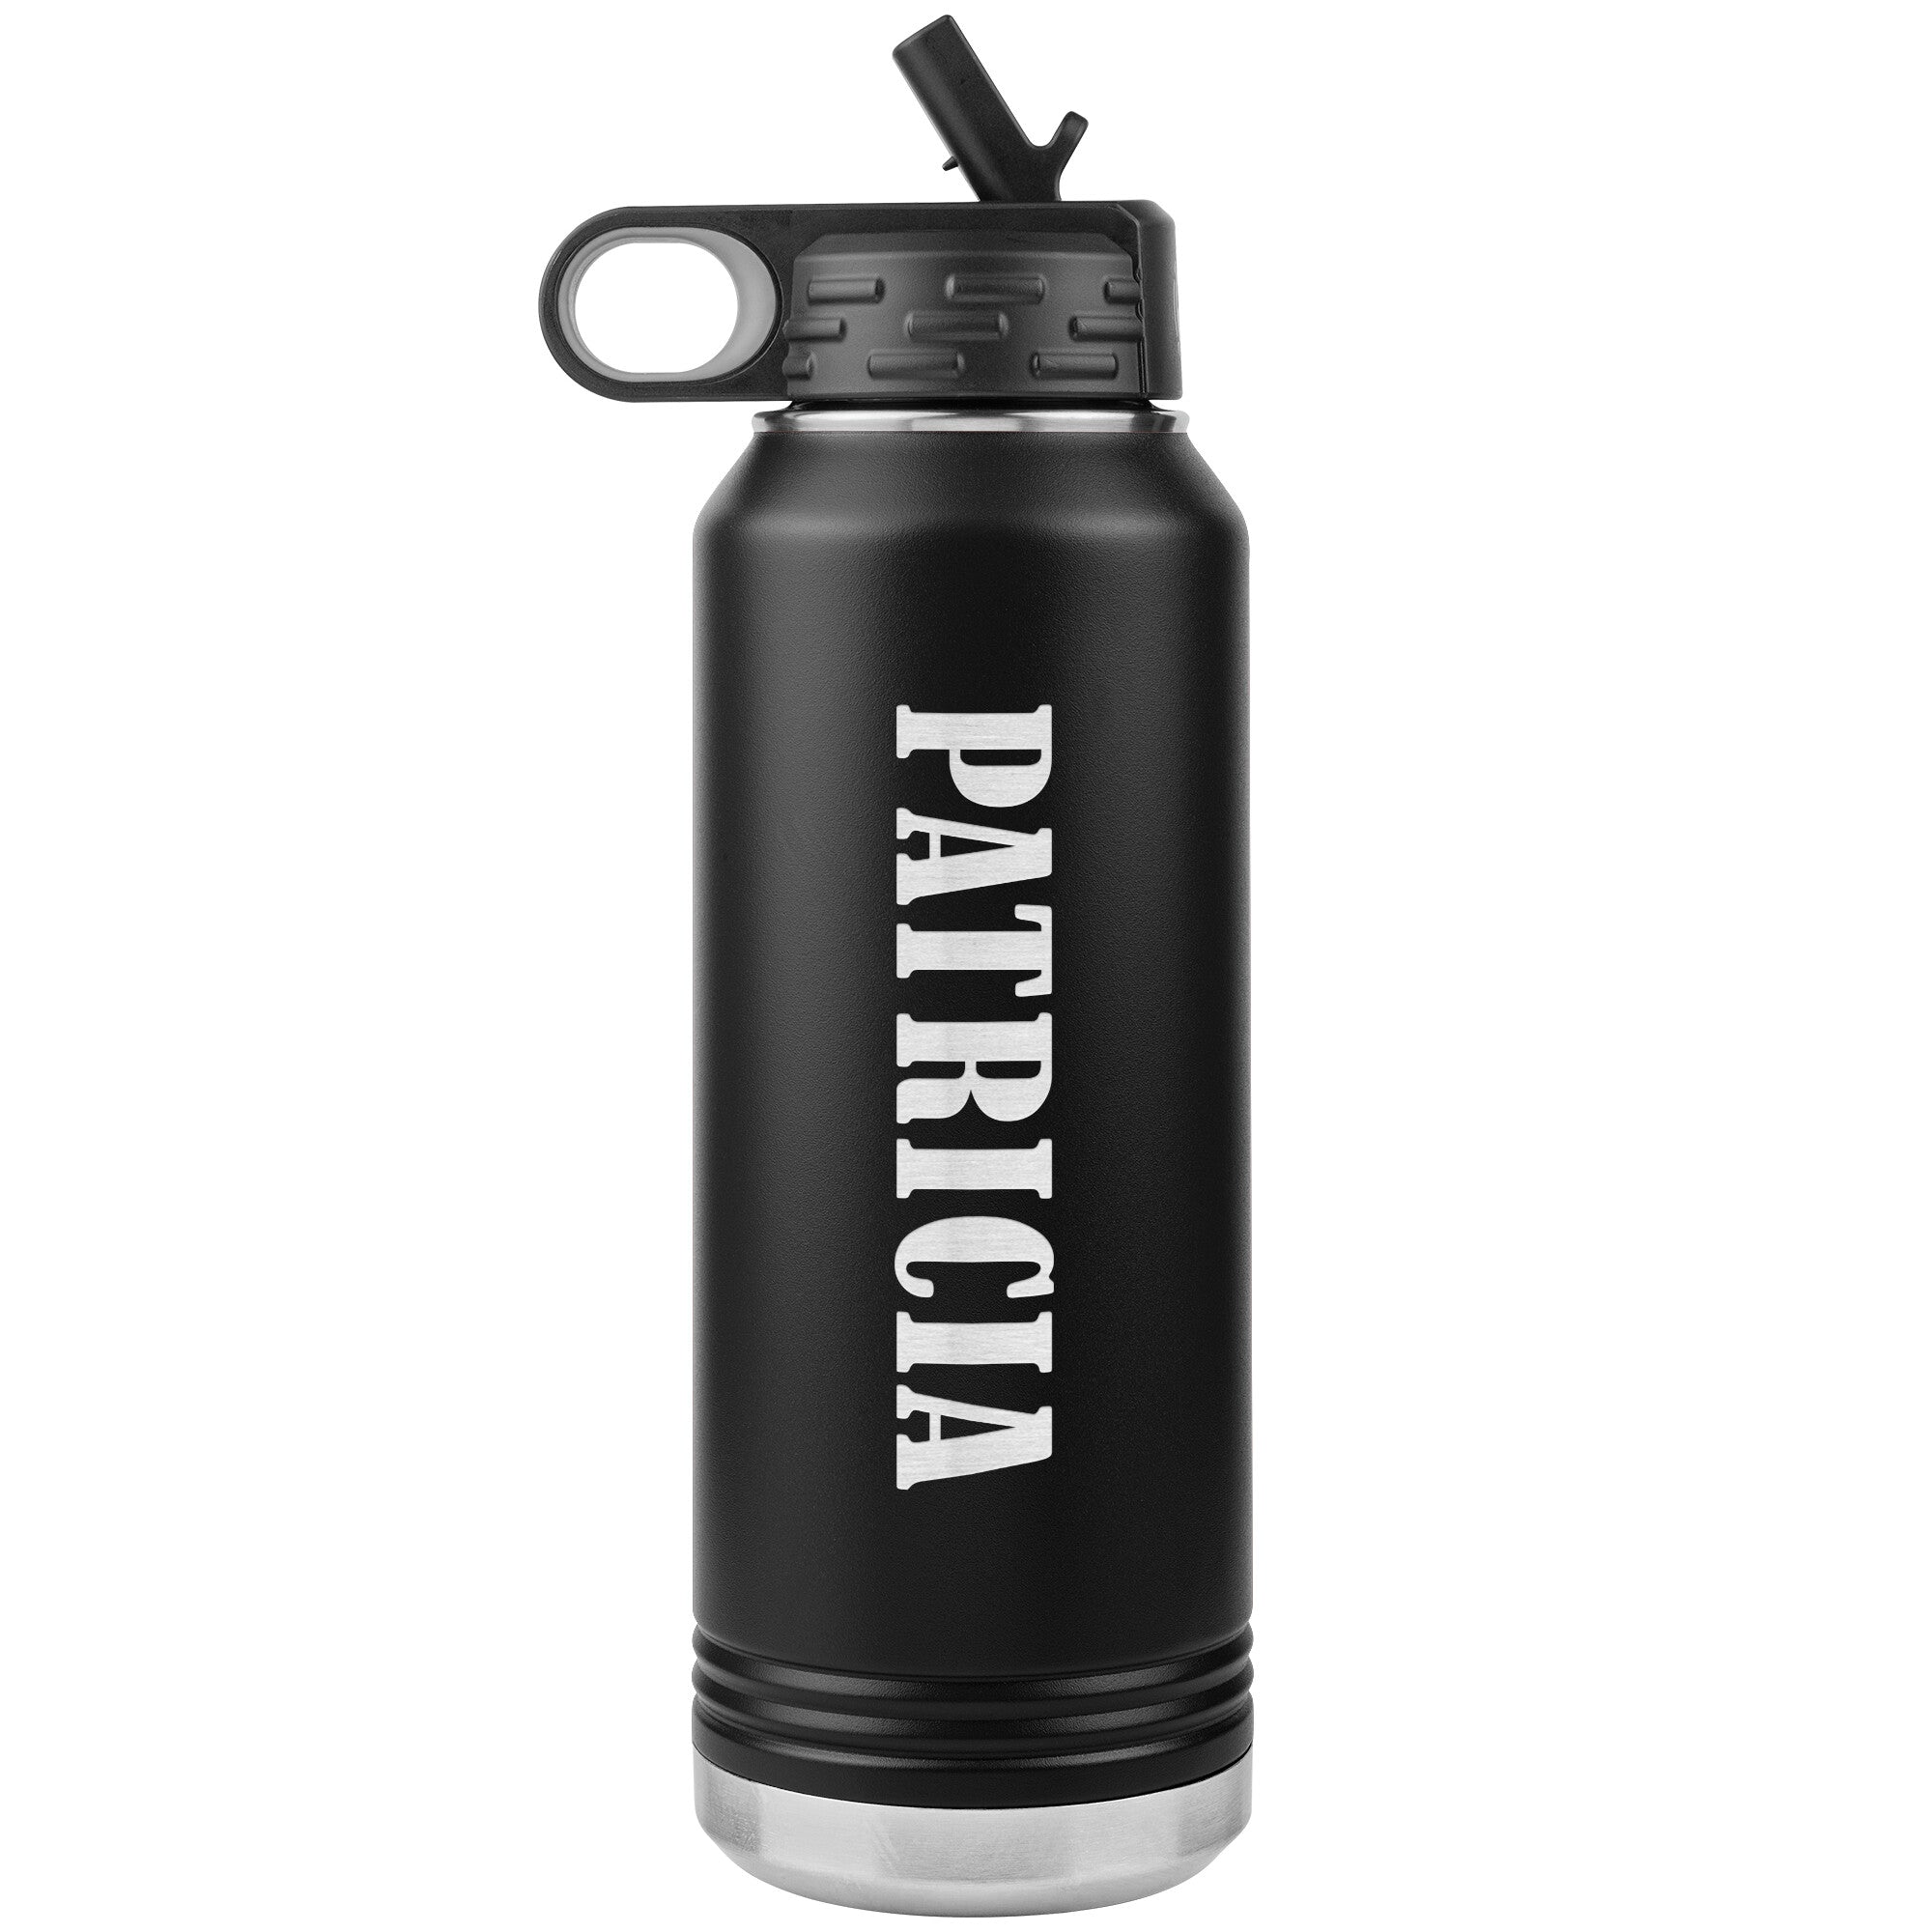 Patricia v02 - 32oz Insulated Water Bottle